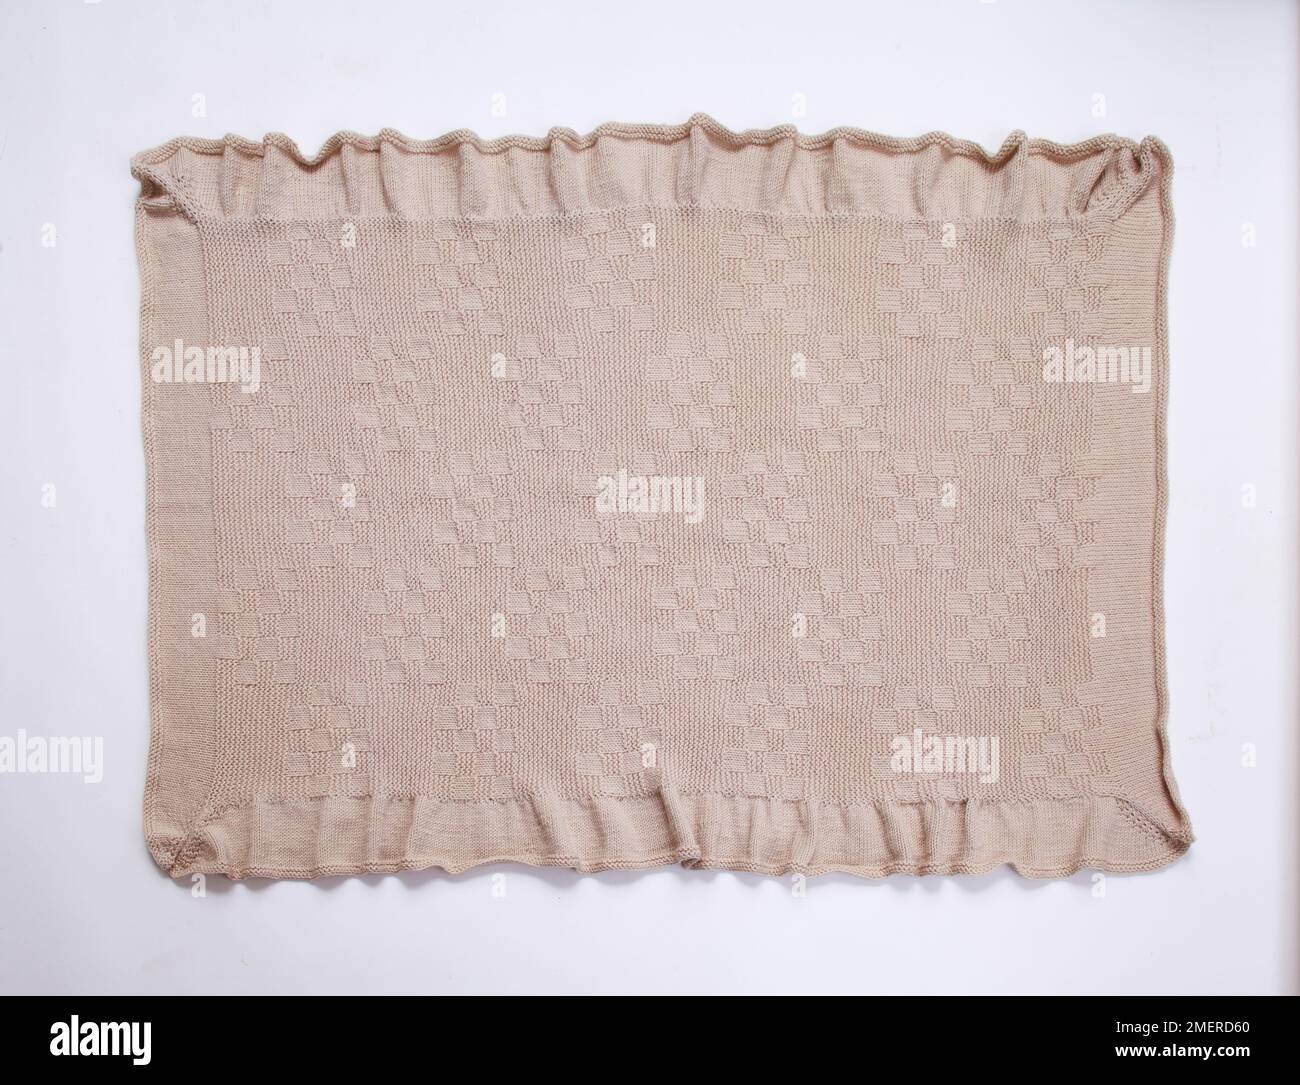 Knitted blanket laid flat Stock Photo - Alamy